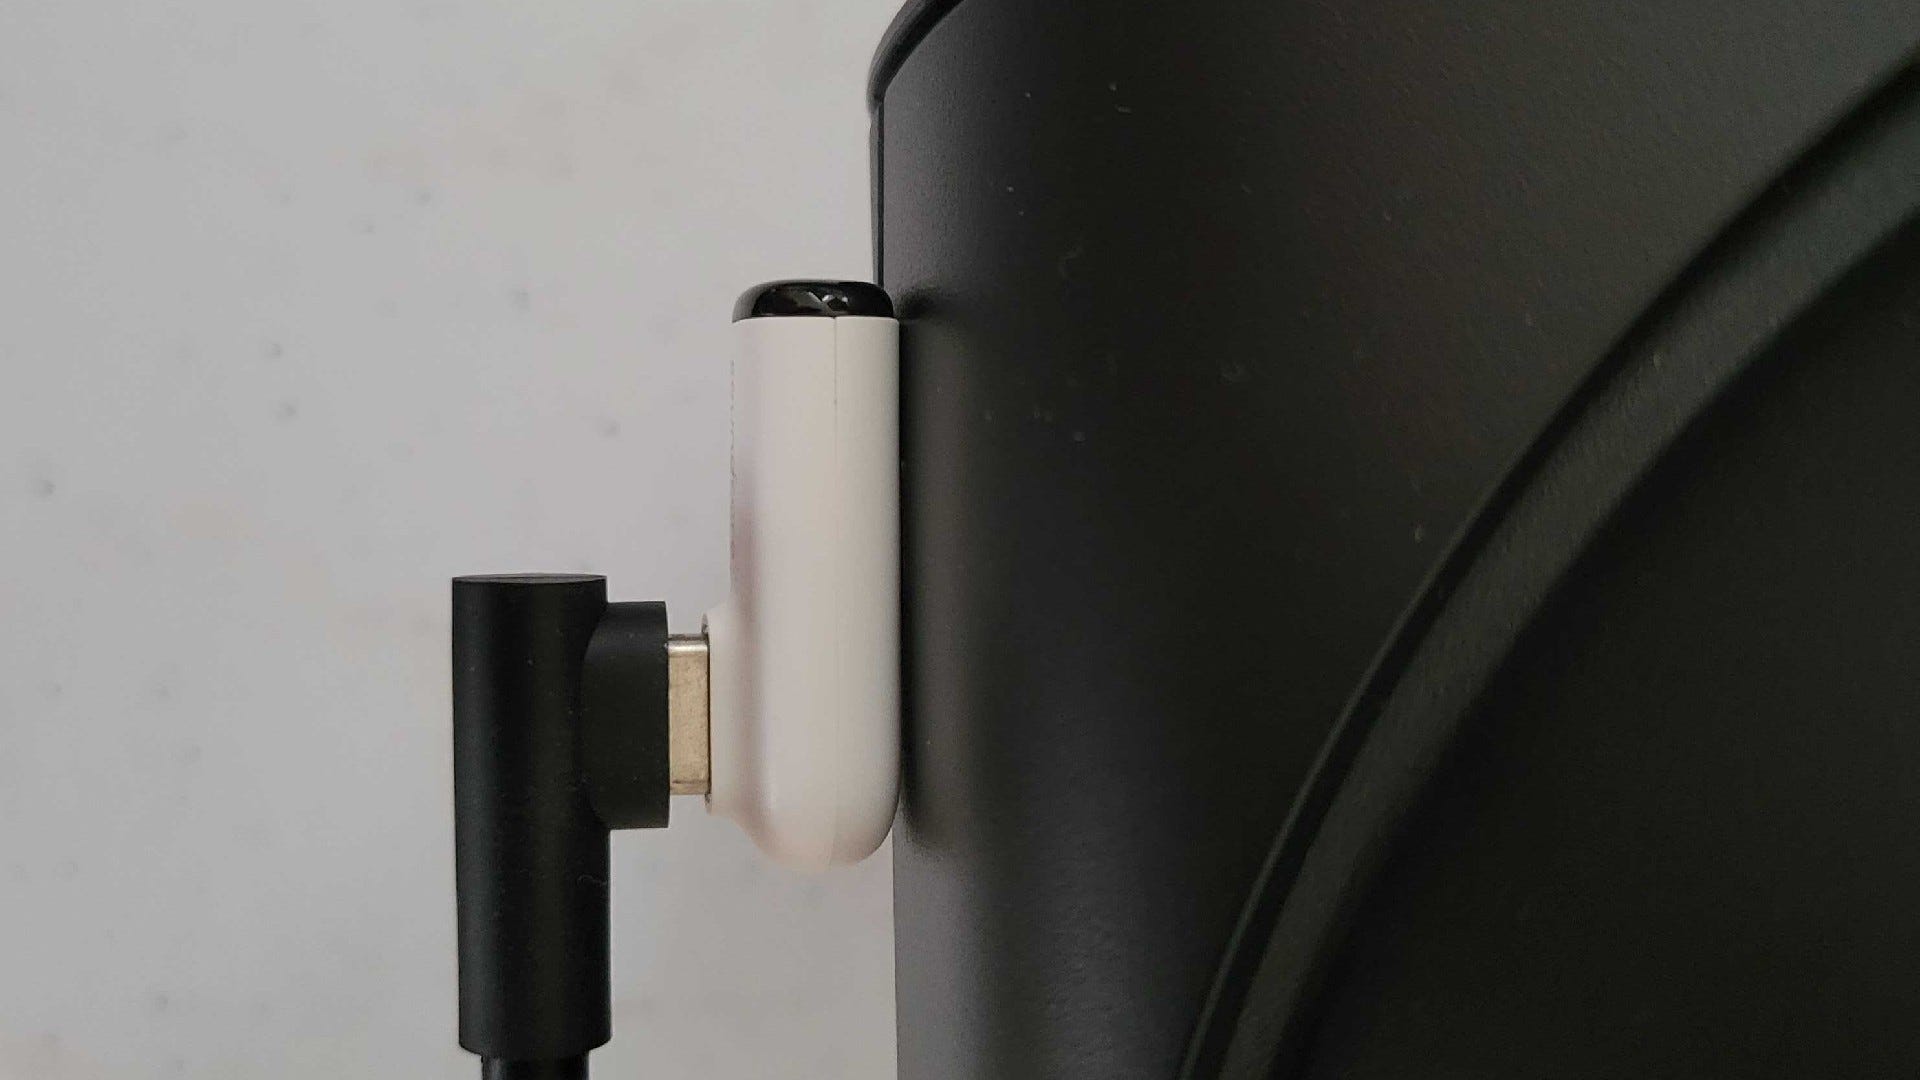 Through charging a Quest Pro with the Soundcore dongle